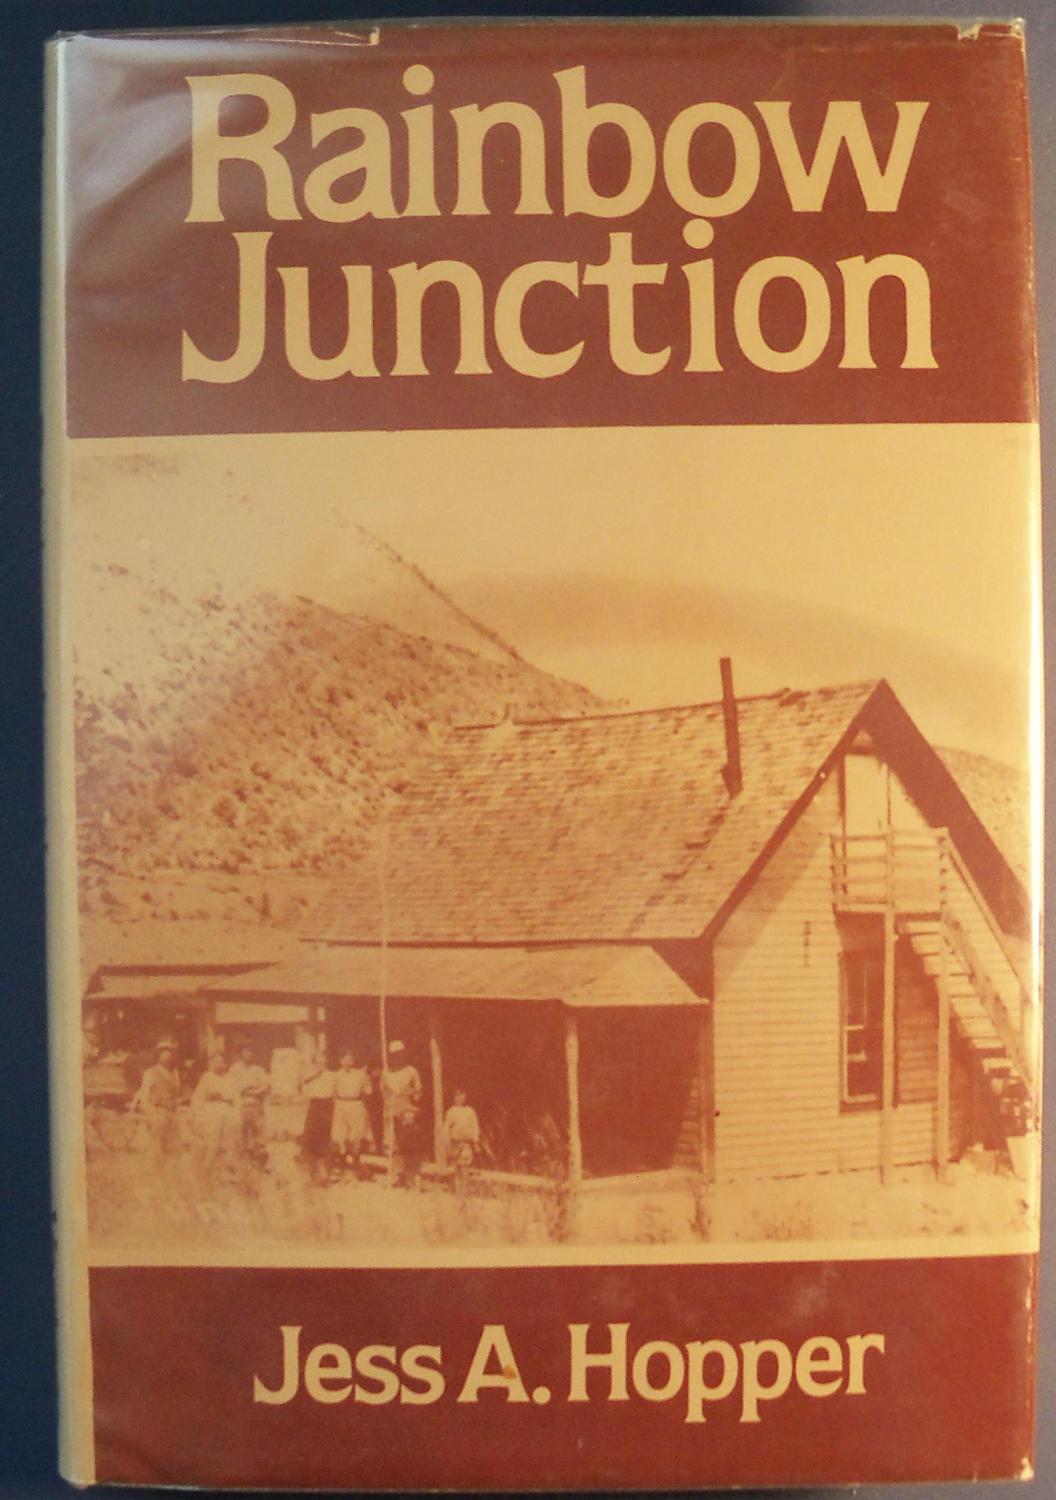 Rainbow junction (book cover)